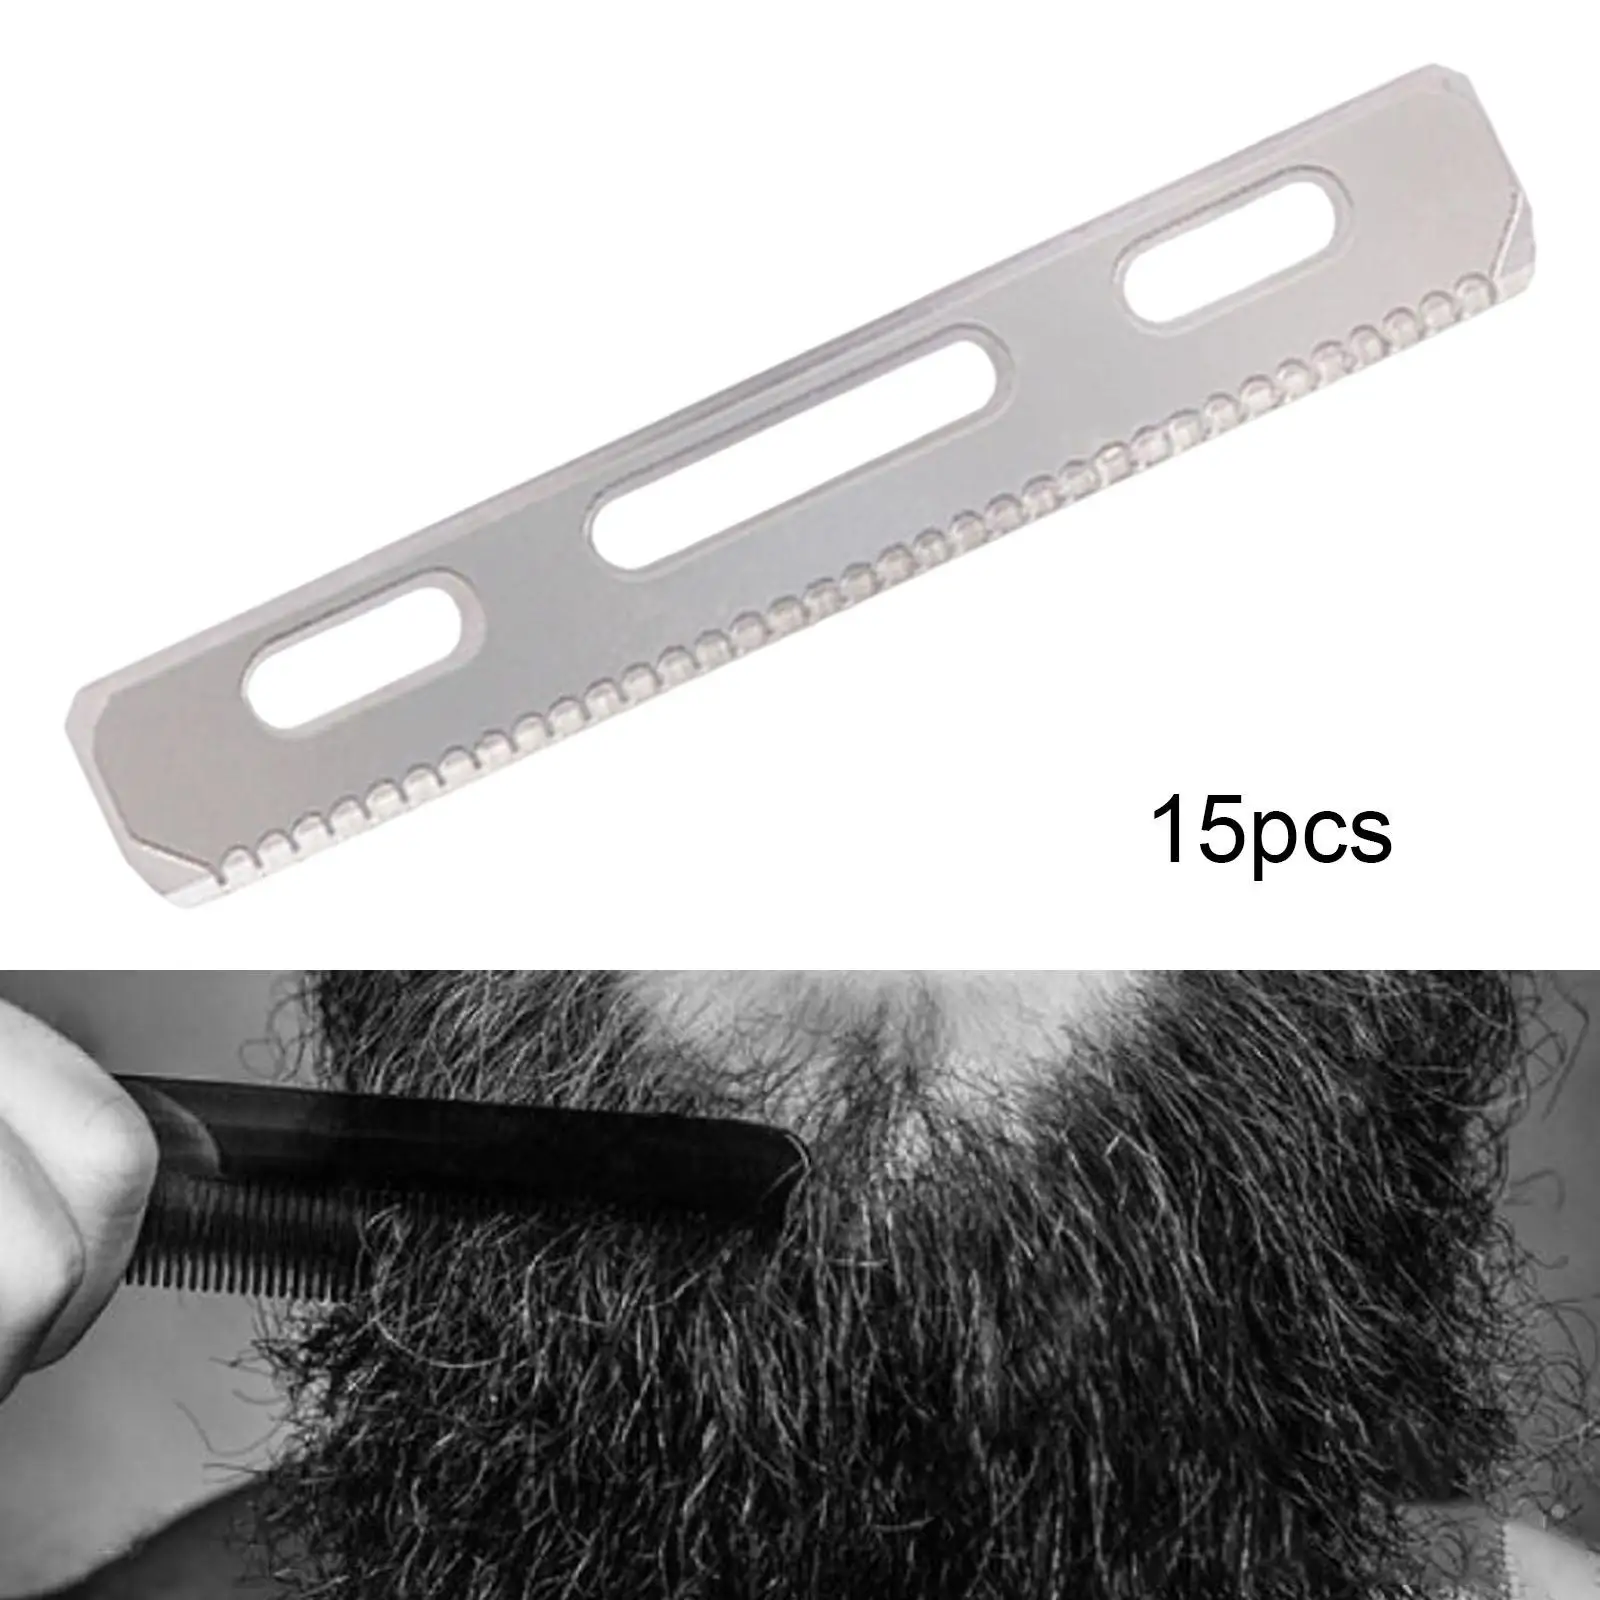 Eyebrow Trimmer Scraper Stainless Steel with Cover Makeup Facial for Women Men